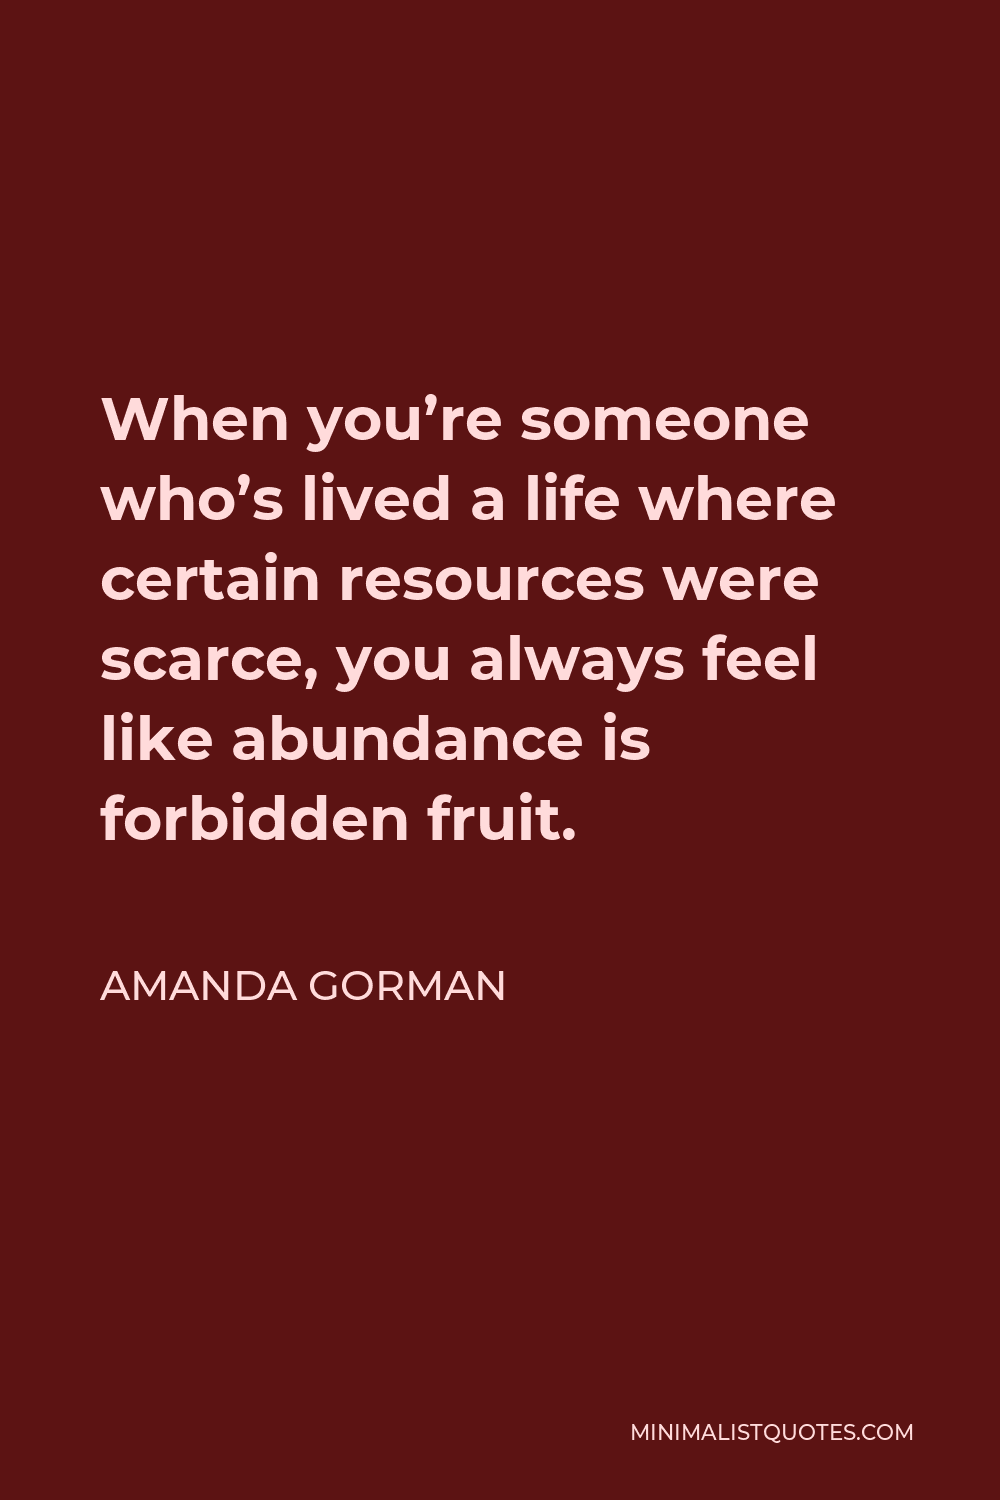 Amanda Gorman Quote - When you’re someone who’s lived a life where certain resources were scarce, you always feel like abundance is forbidden fruit.